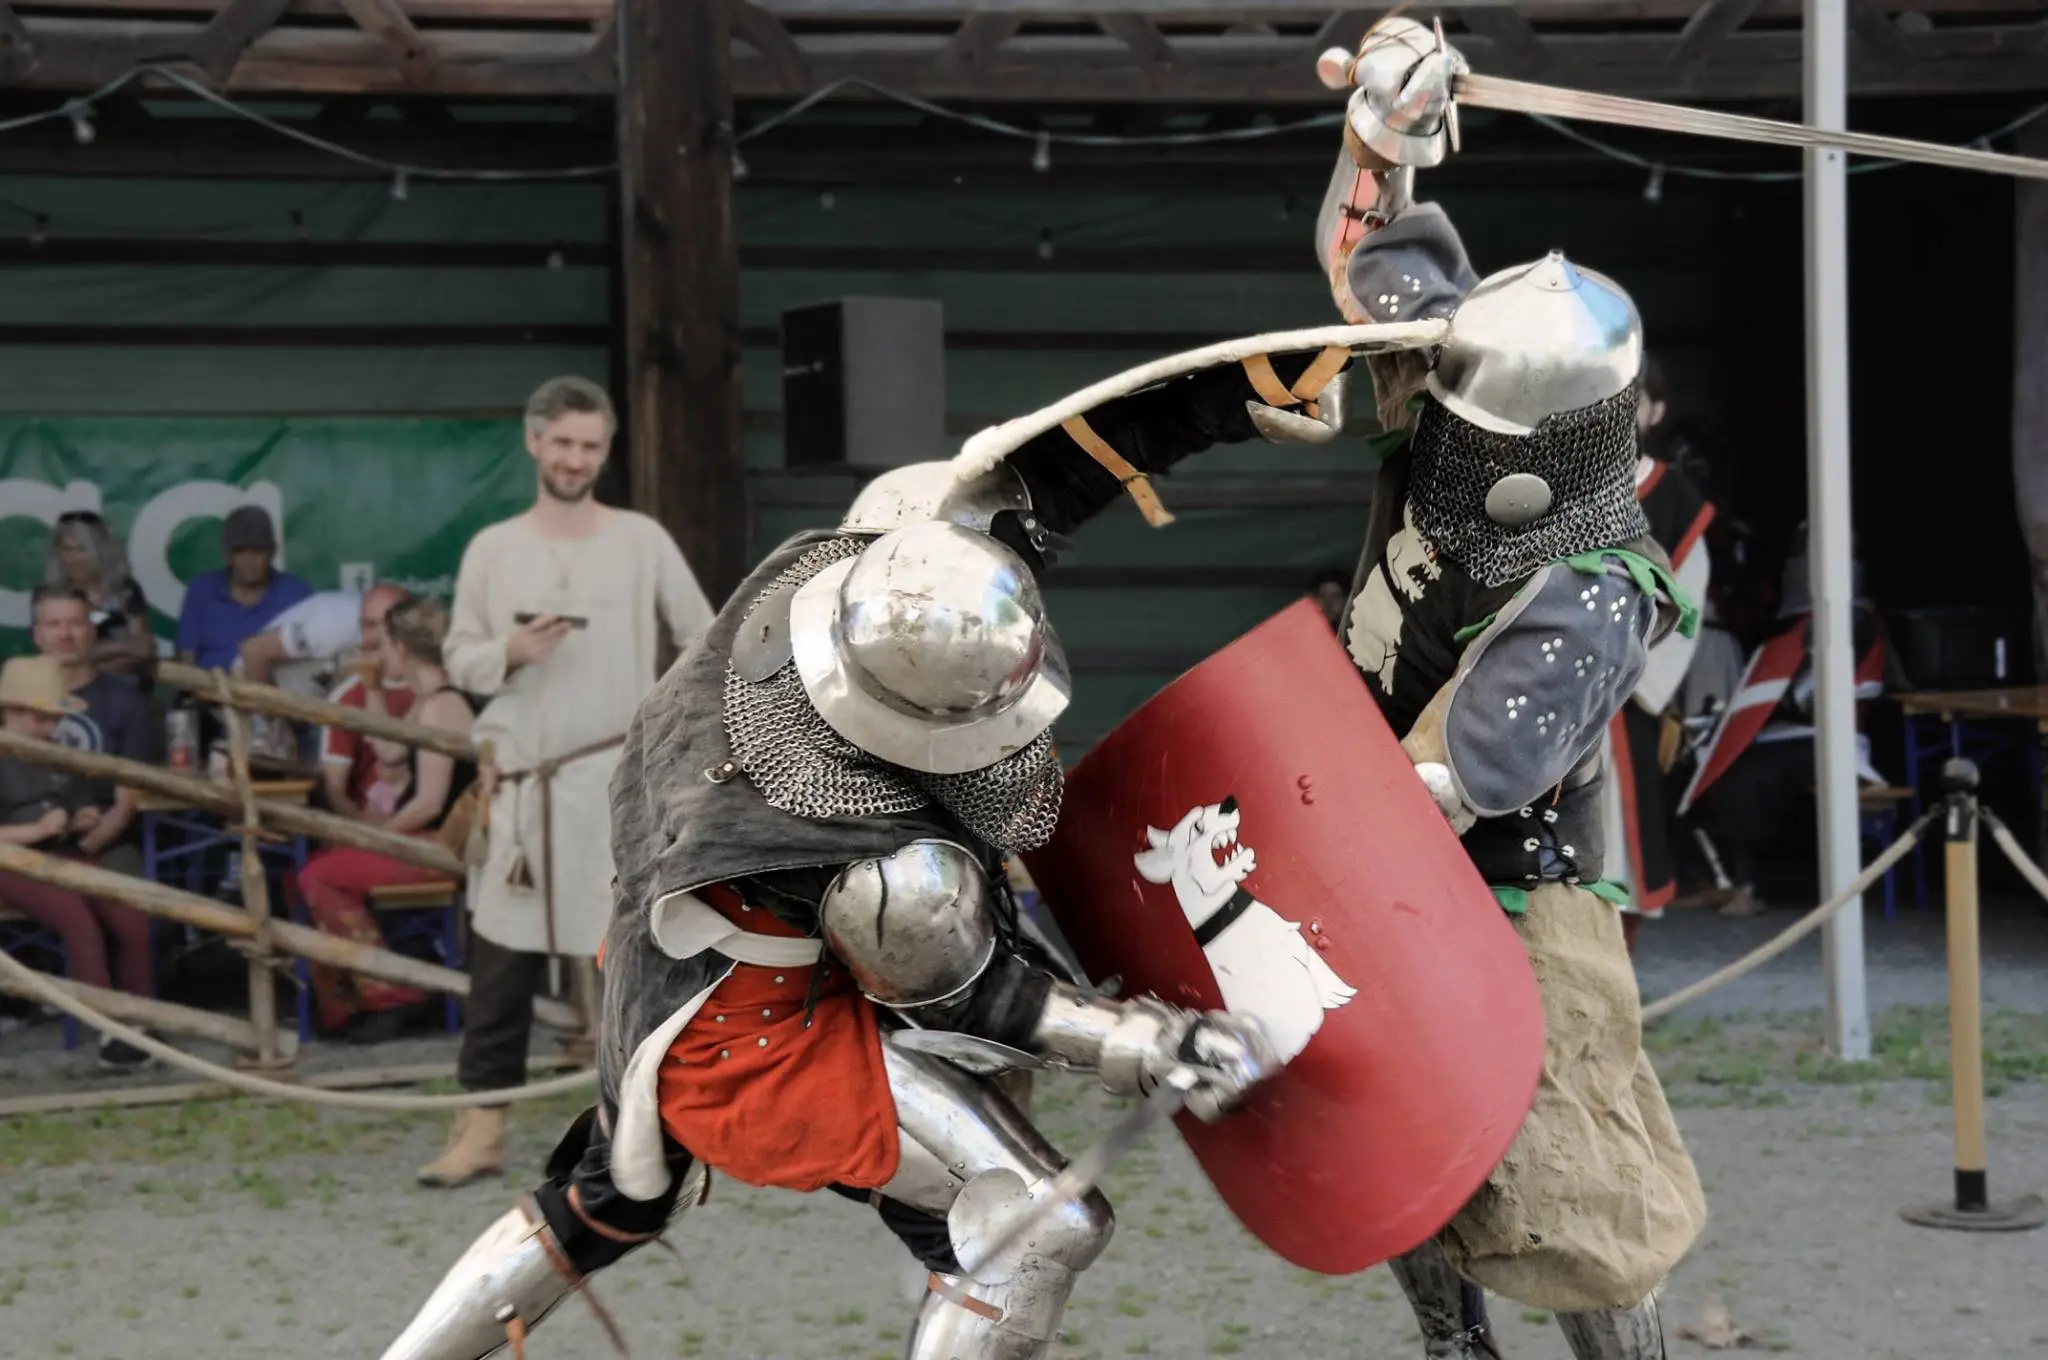 two men in armor fighting with swords